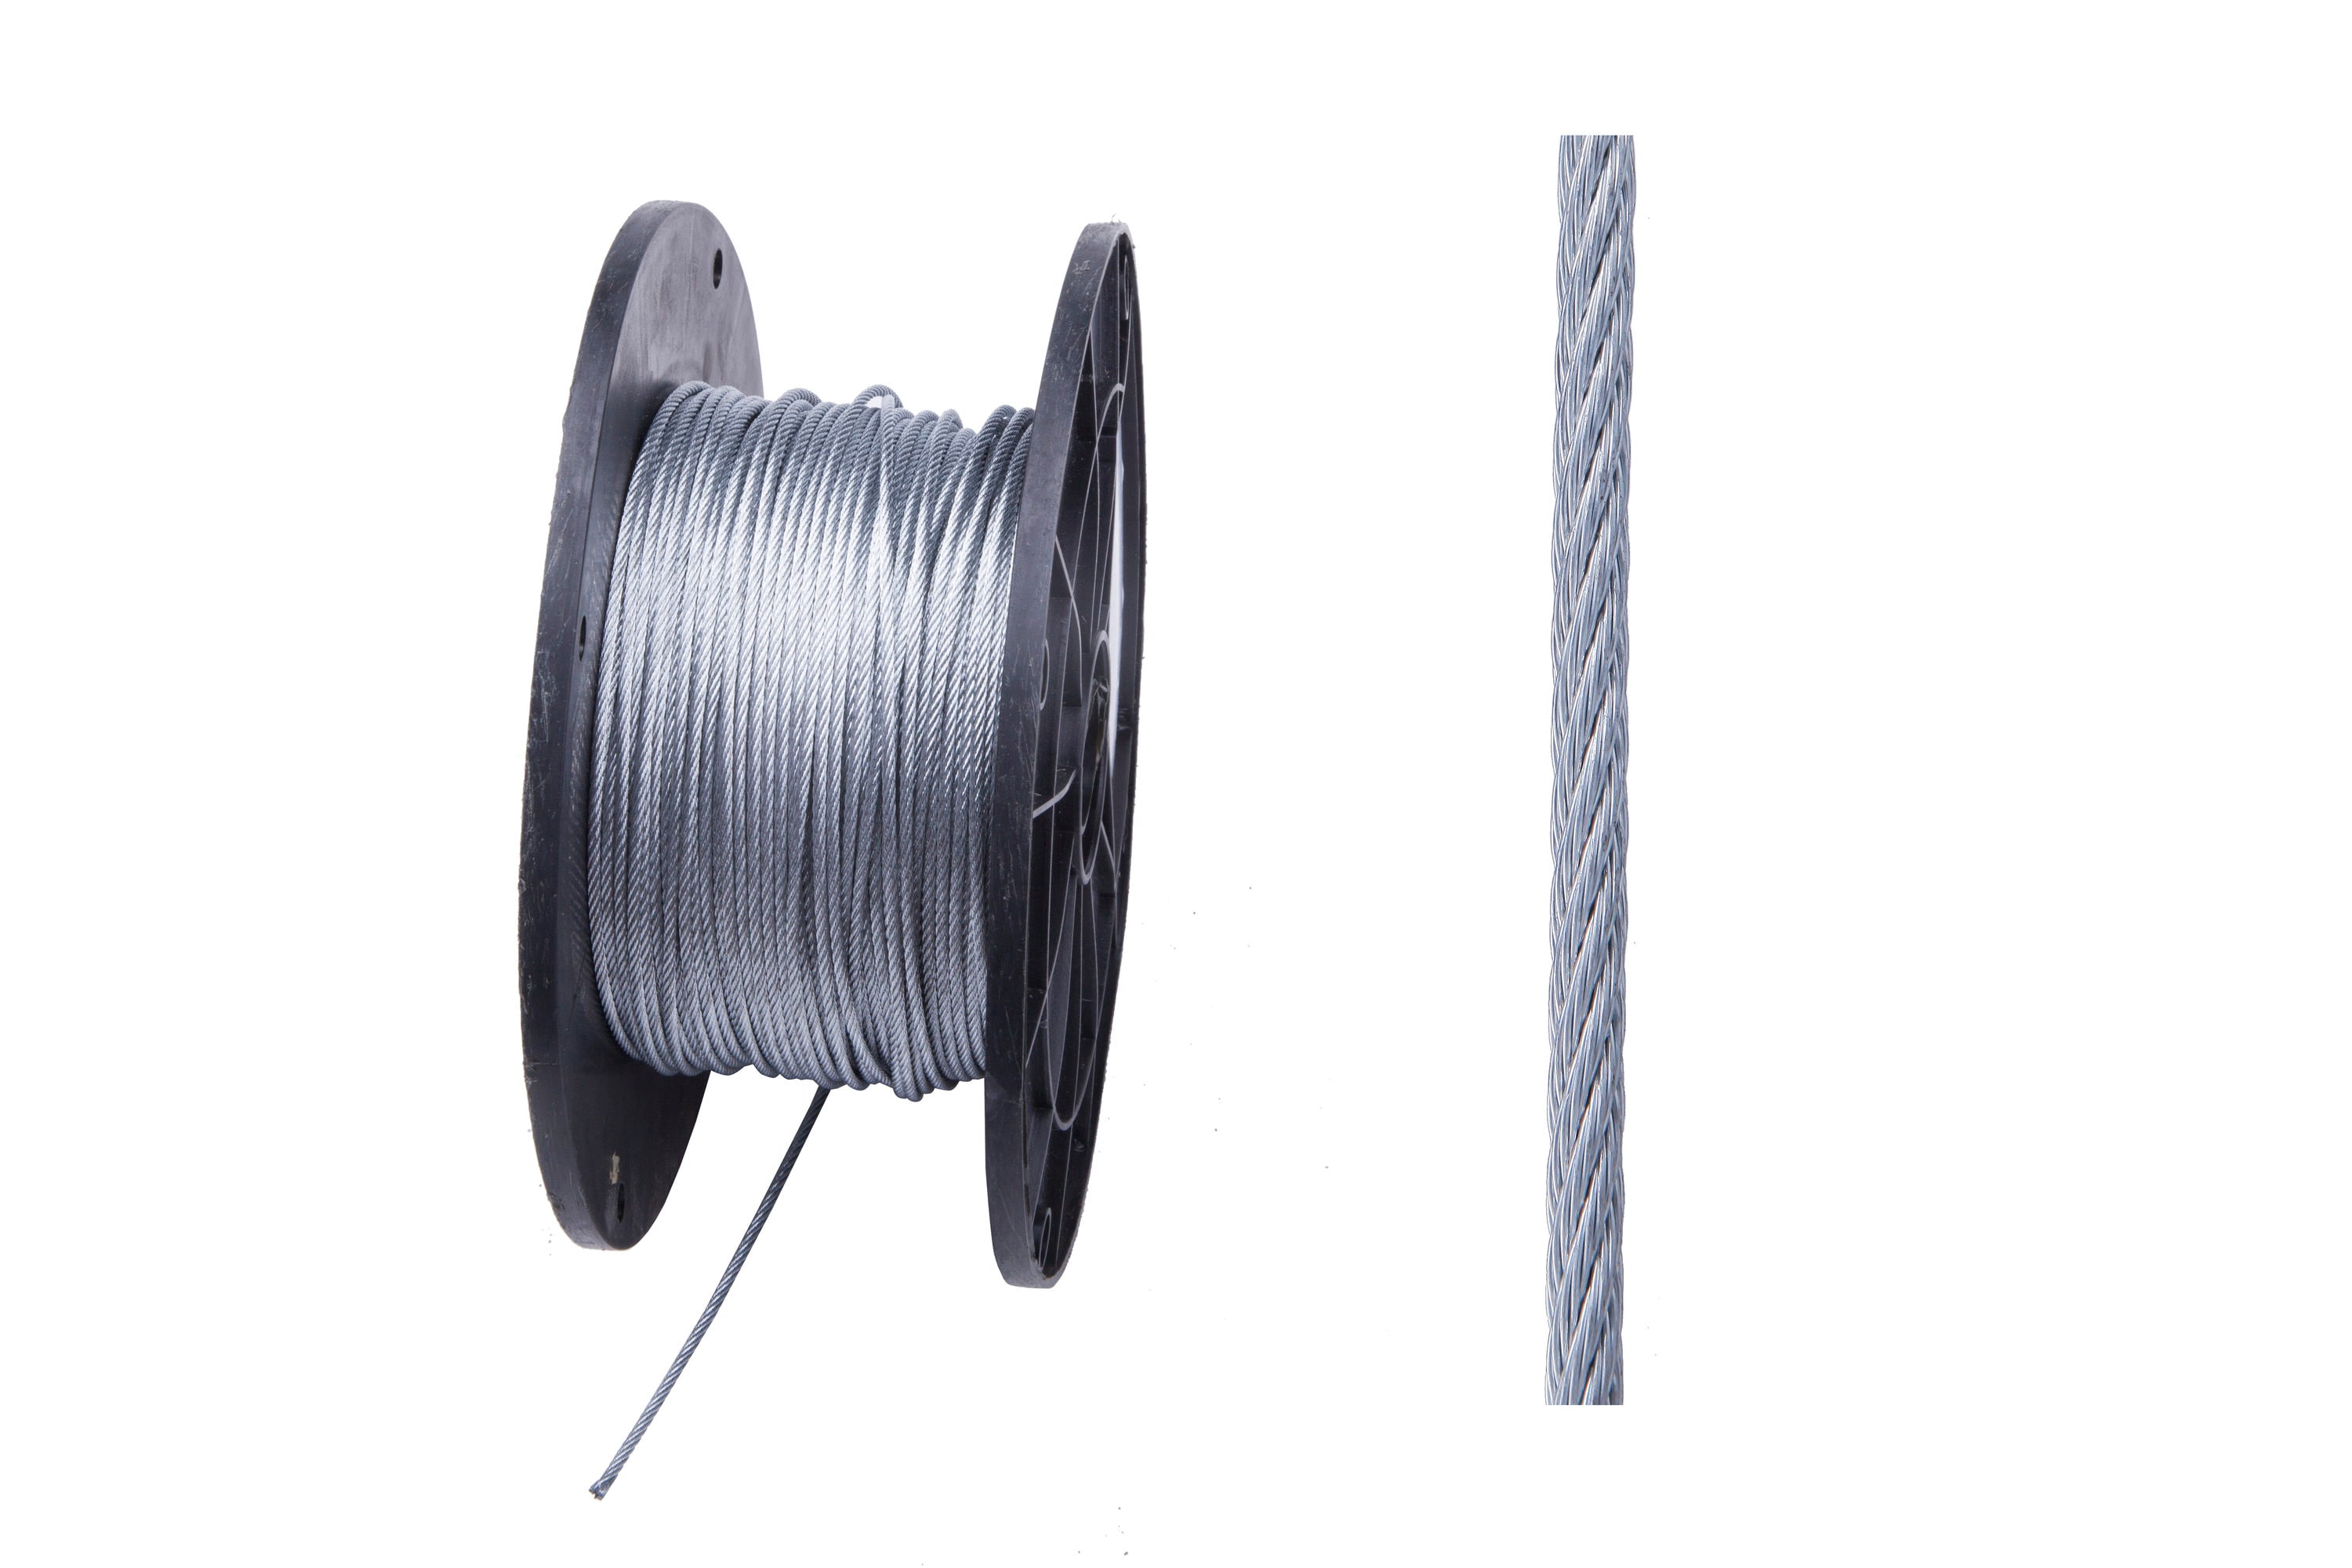 1/8 Wire Rope Kit, 50ft Stainless Steel Wire Cable for Picture Hanging